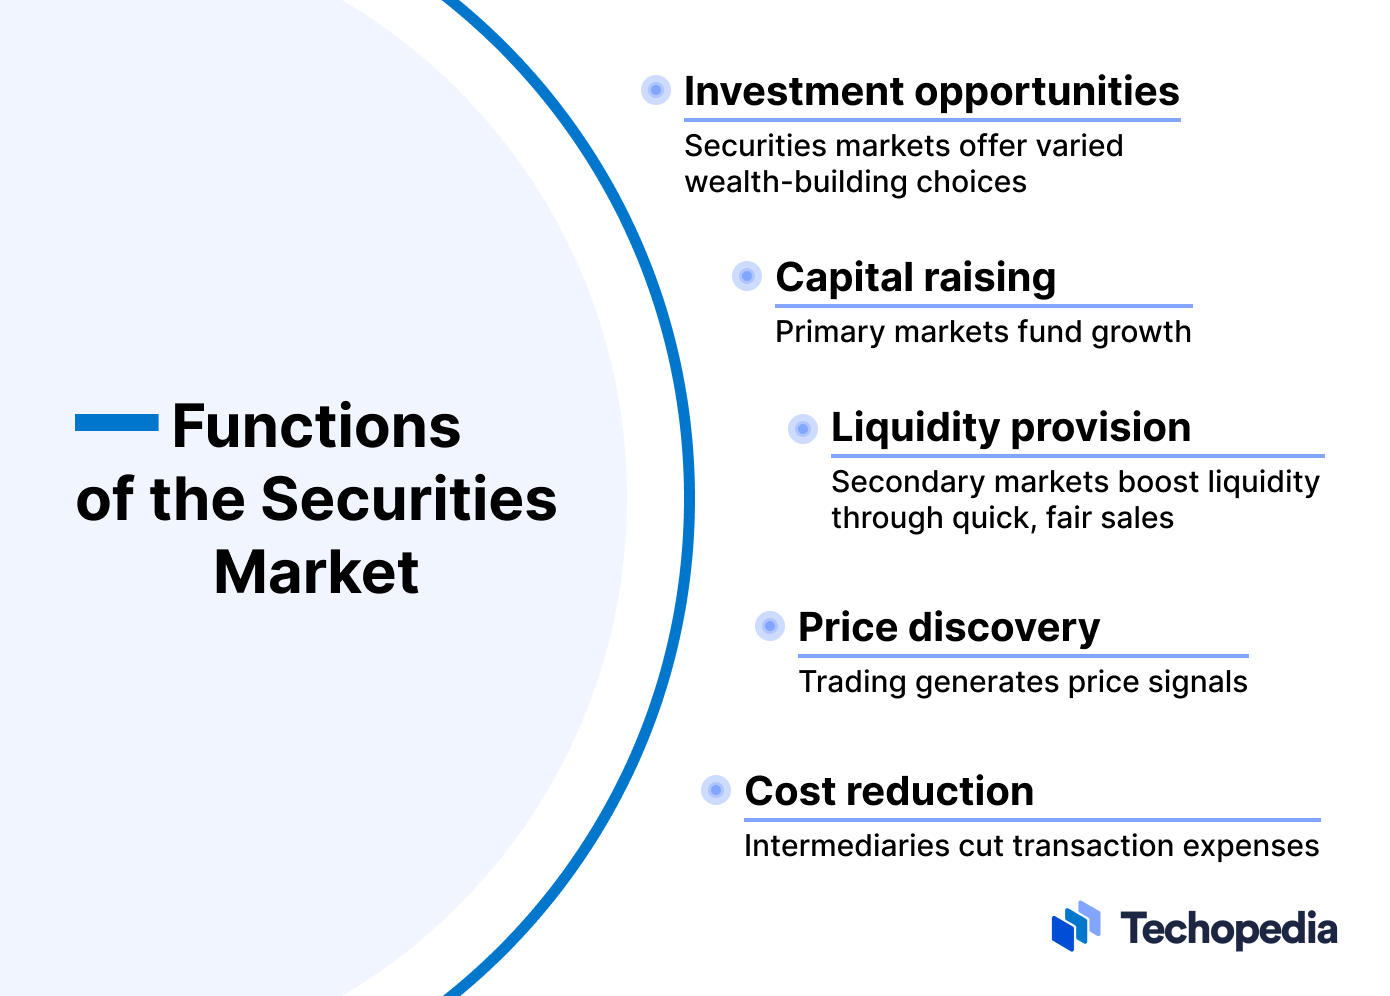 Functions of the Securities Markets